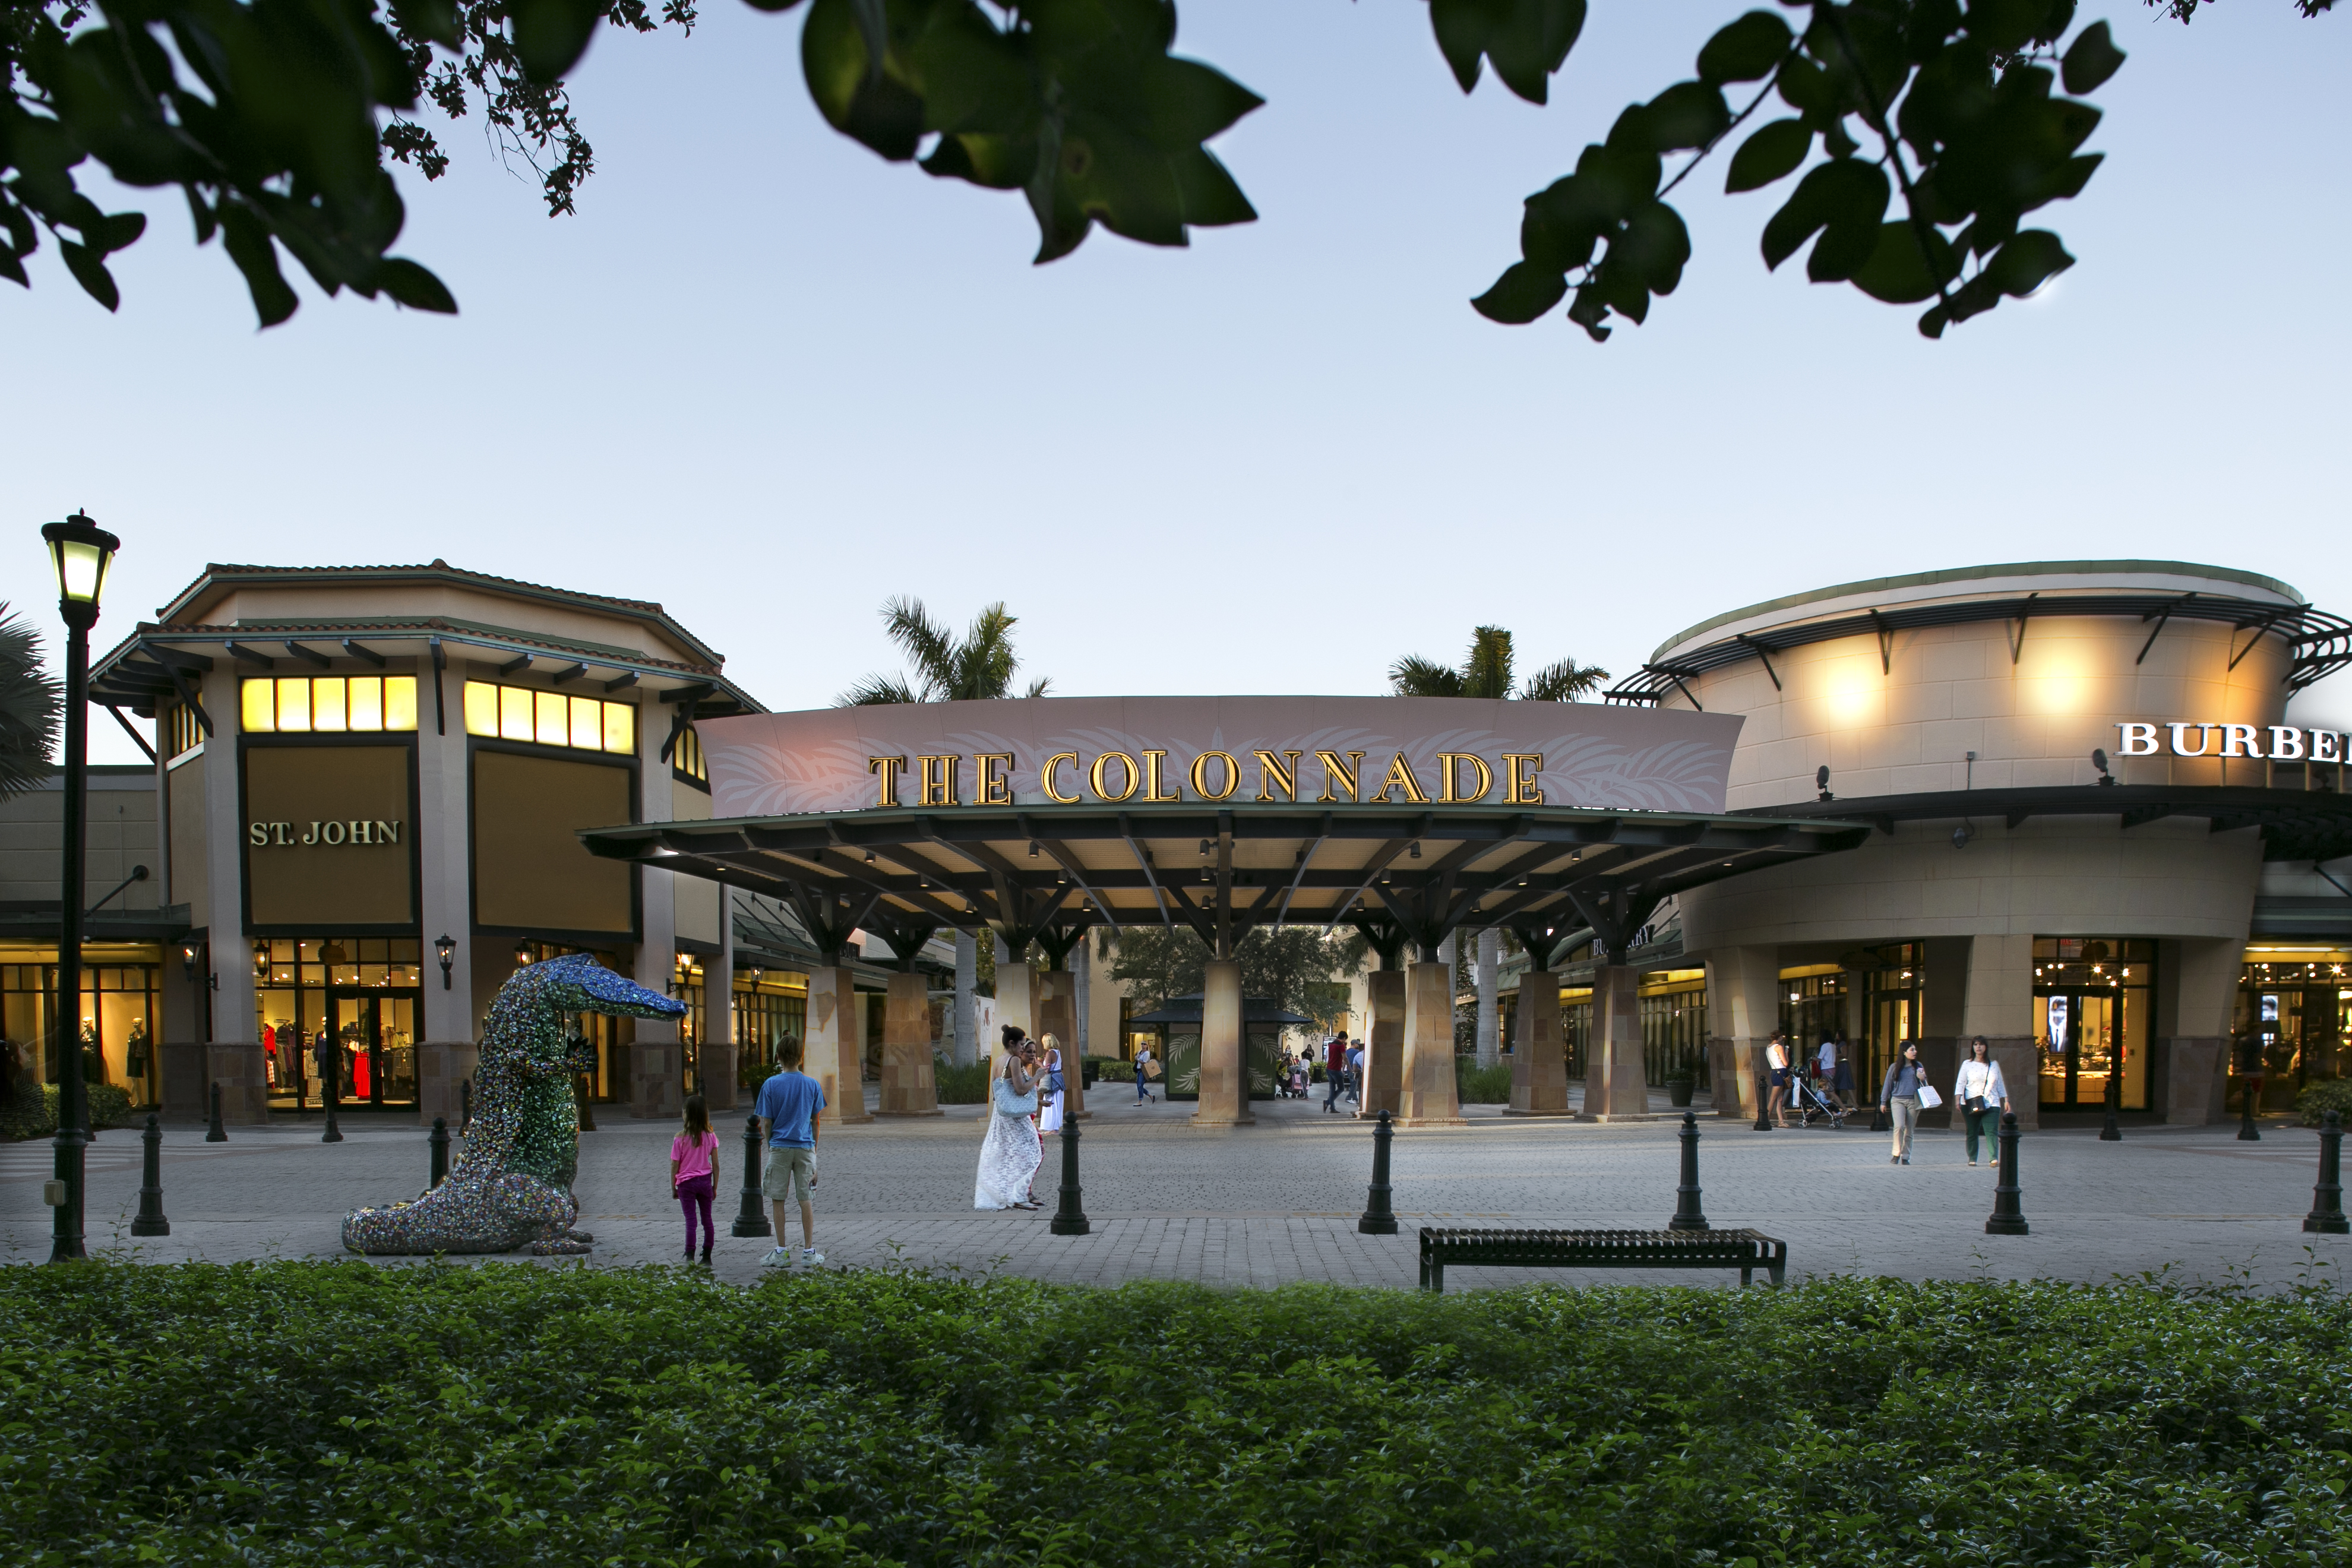 Sawgrass Mills shoppers show up early for Black Friday